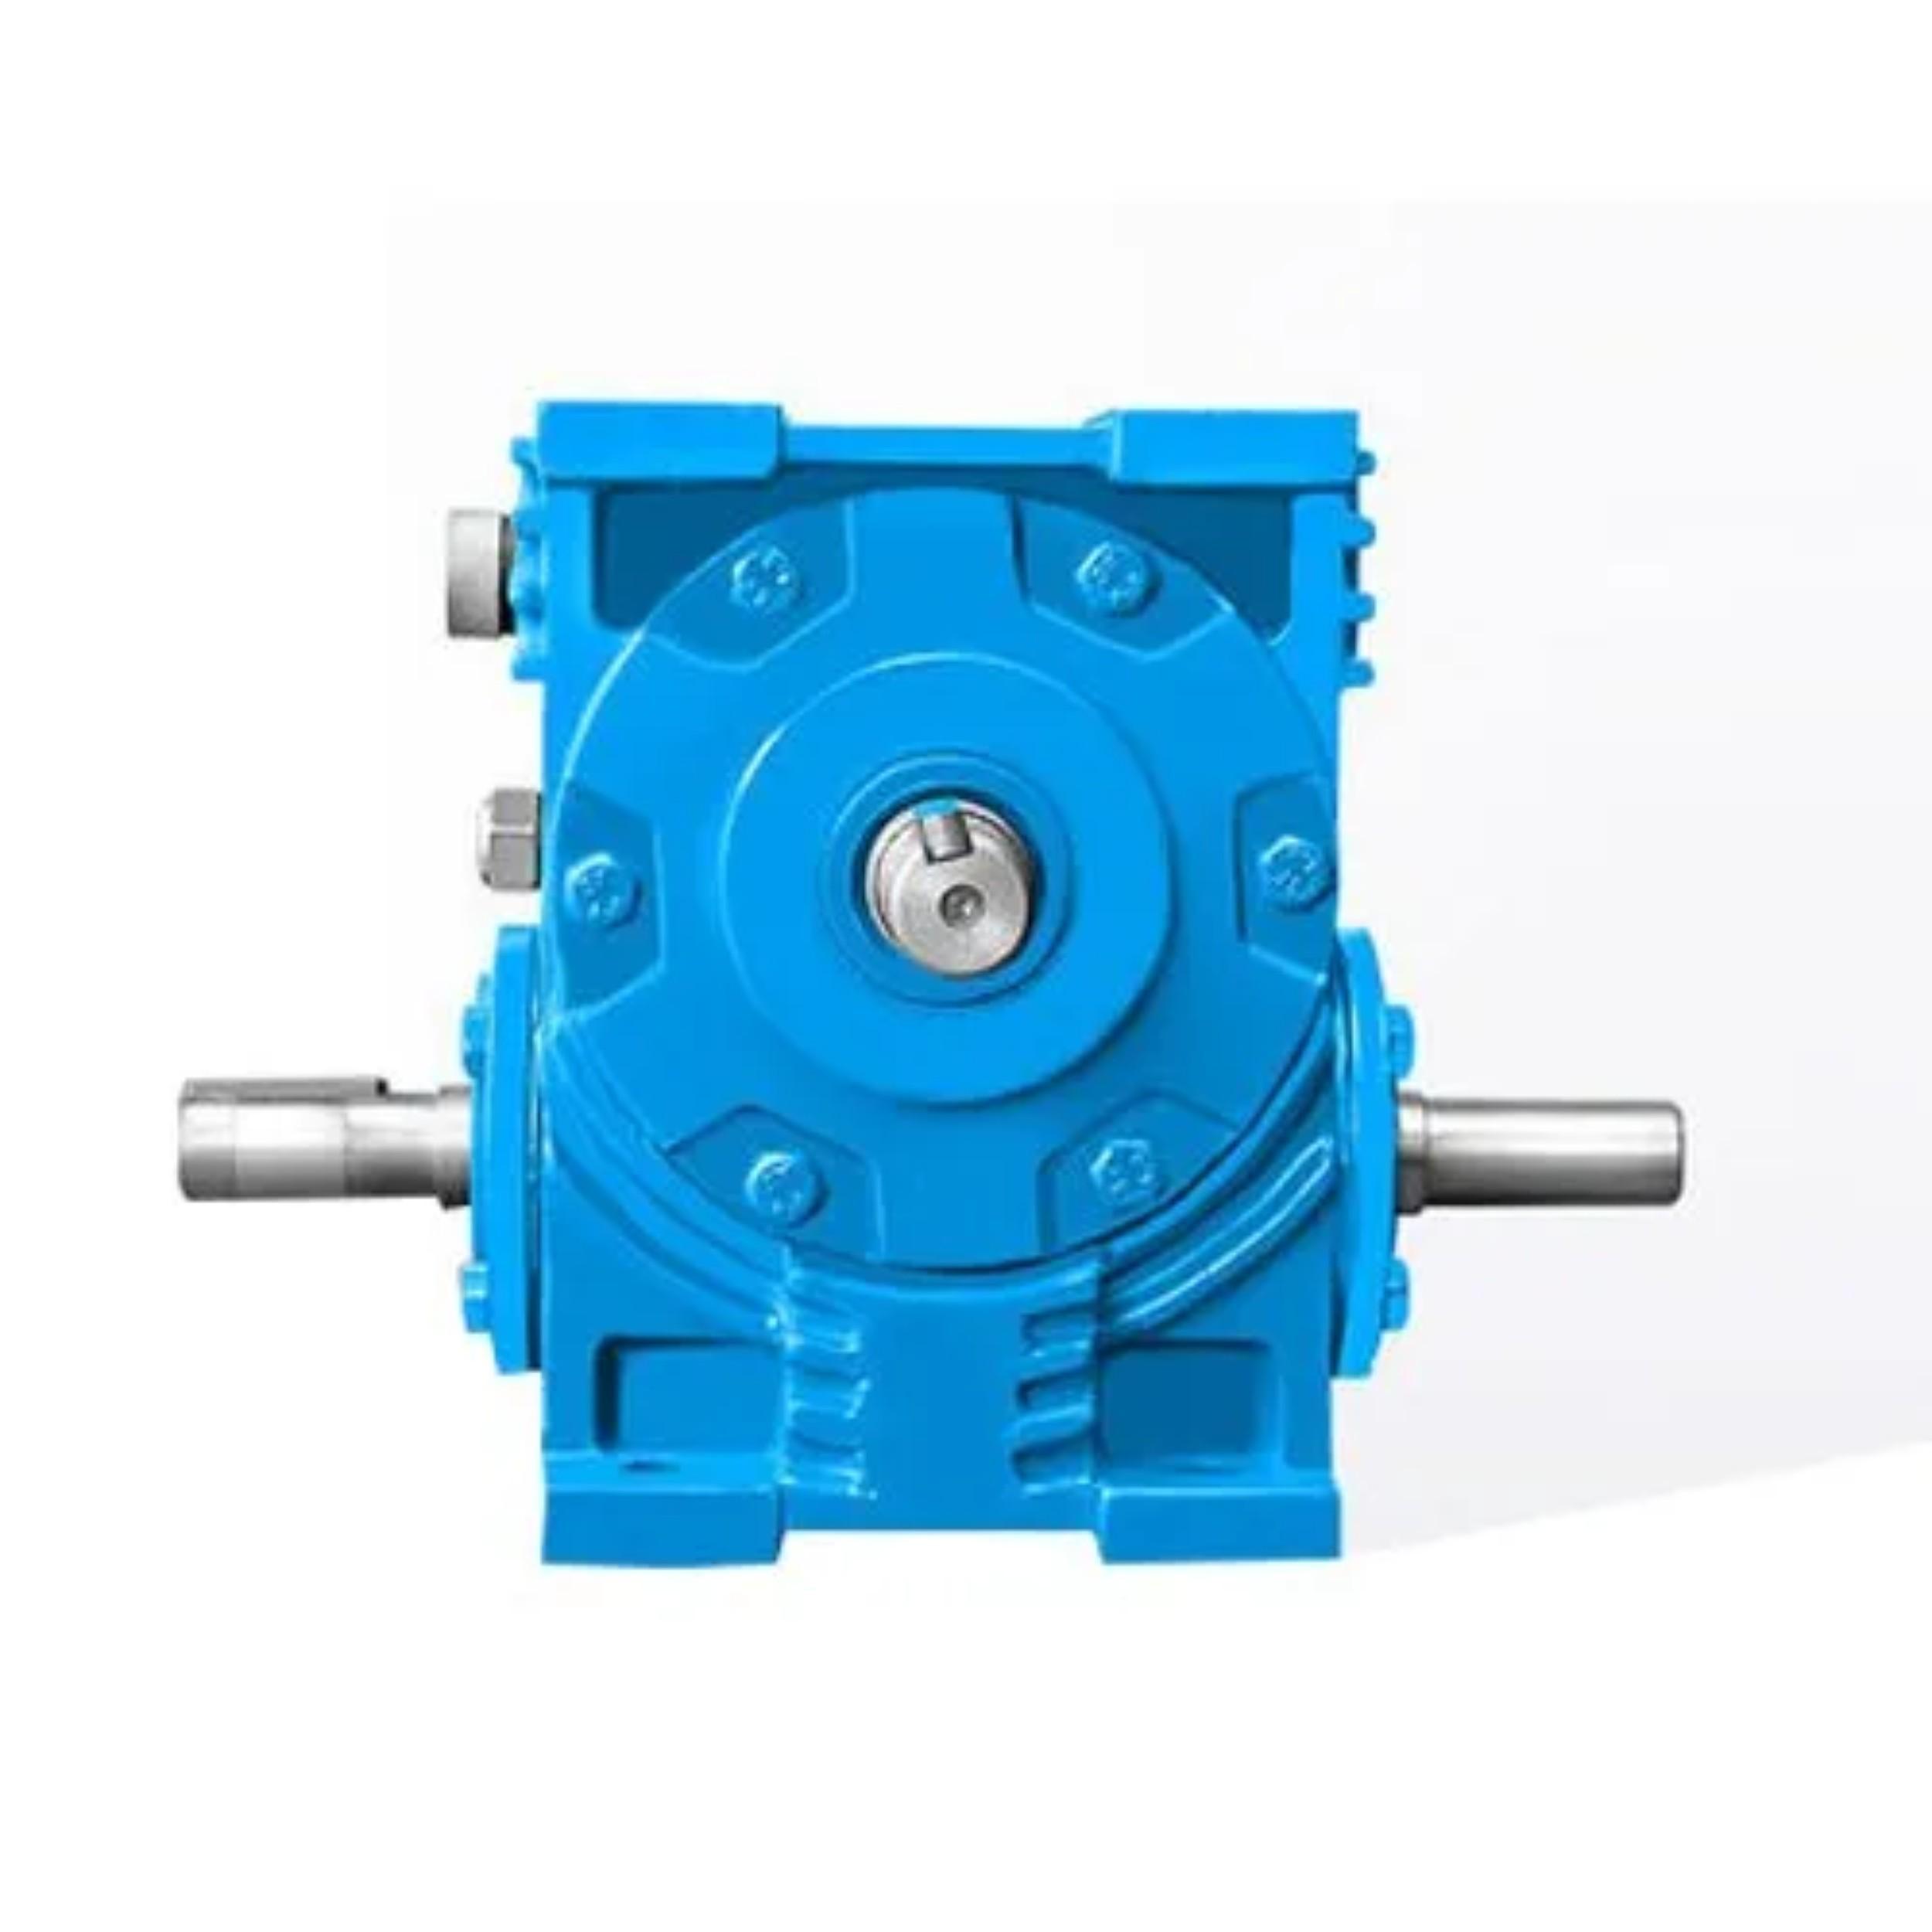 Buy 1 - 100 kW Worm Reduction Gear Box 2:80 100 - 4500 Nm online at best  rates in India